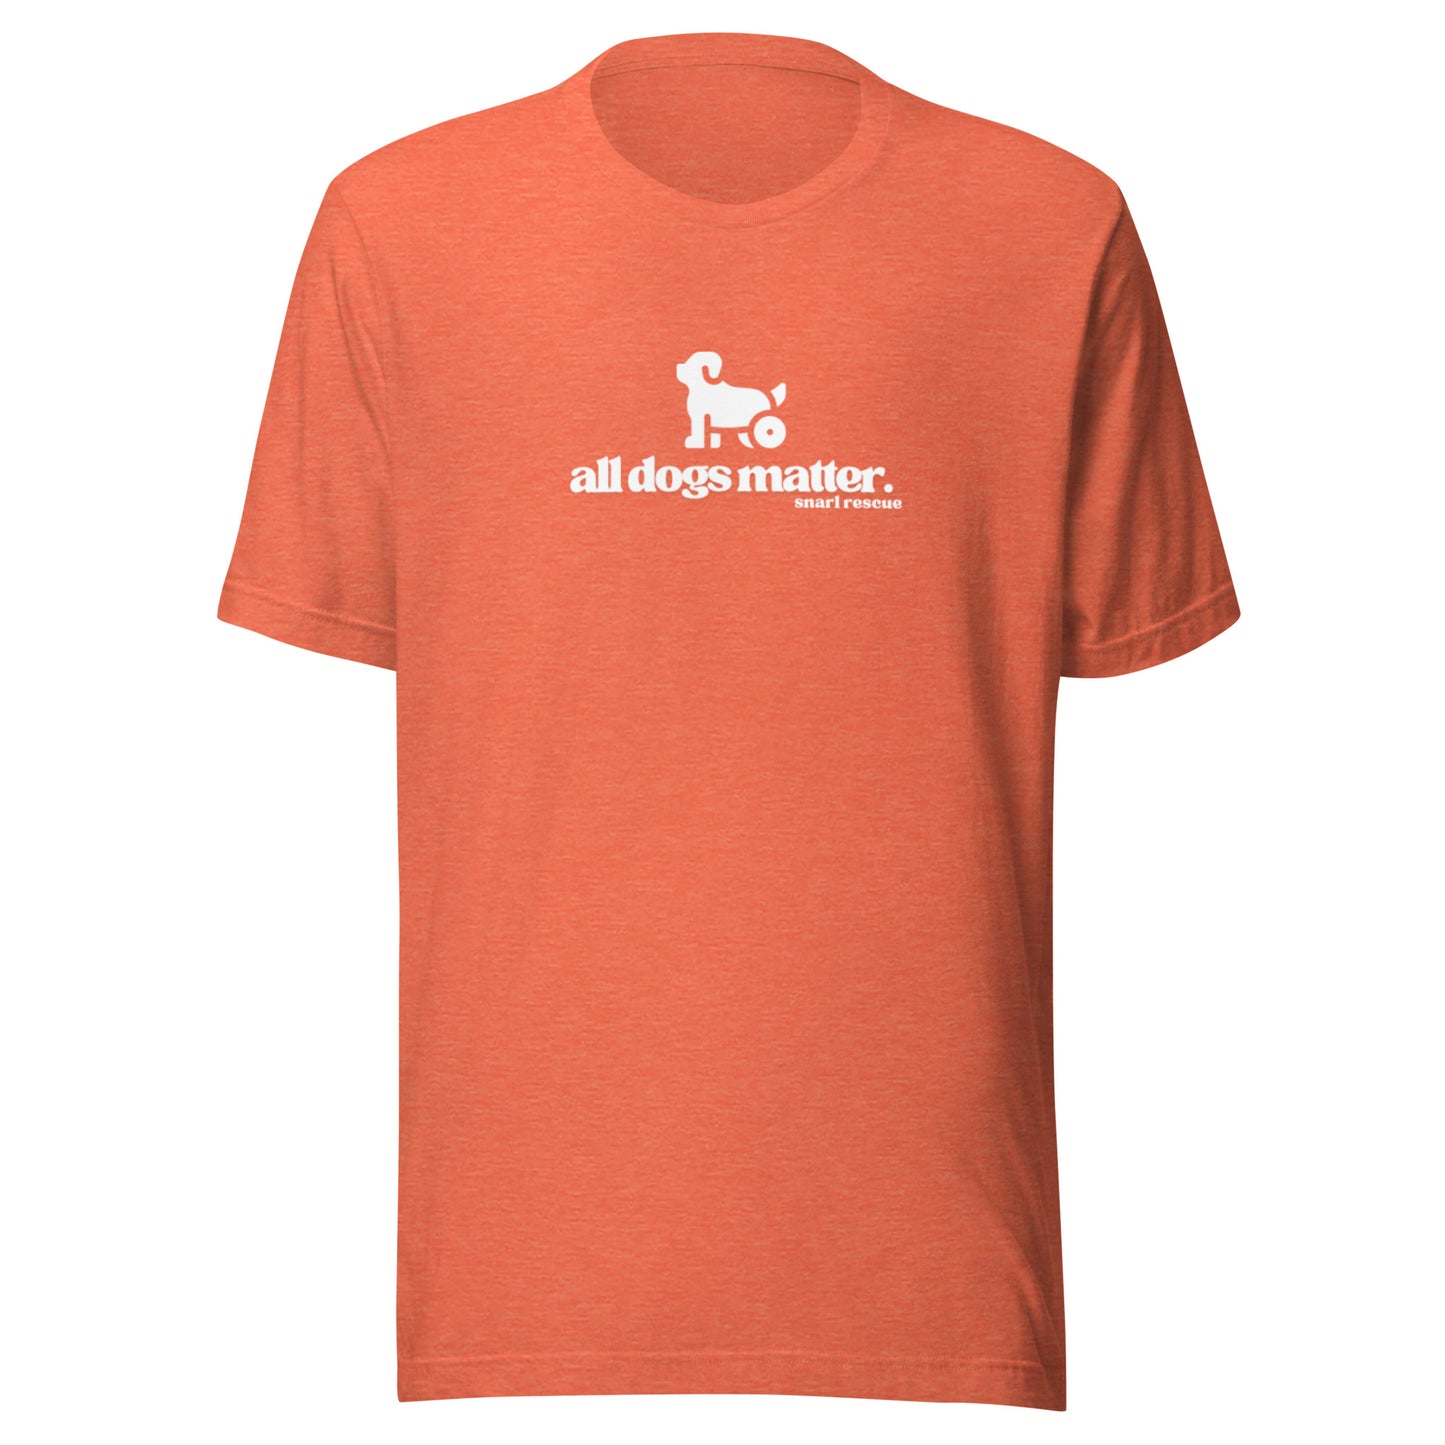 The All Dogs Matter Tee